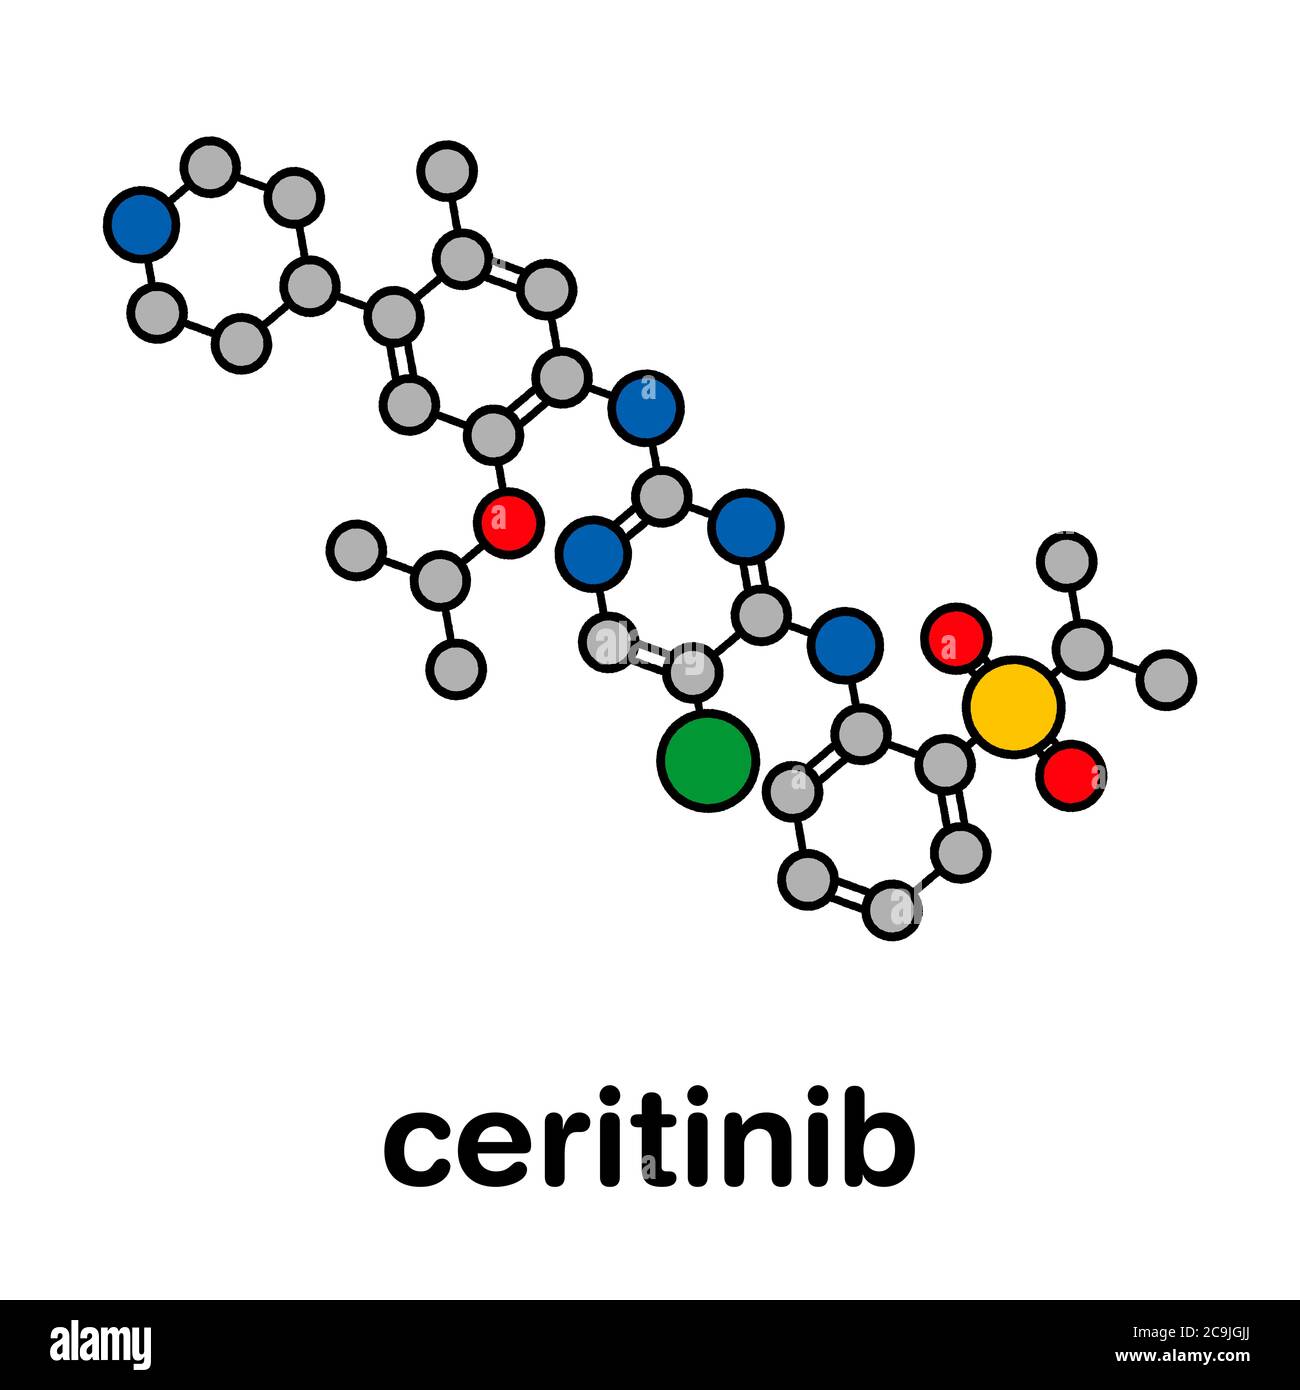 Ceritinib cancer drug molecule. ALK inhibitor used in treatment of metastatic non-small cell lung cancer. Stylized skeletal formula (chemical structur Stock Photo